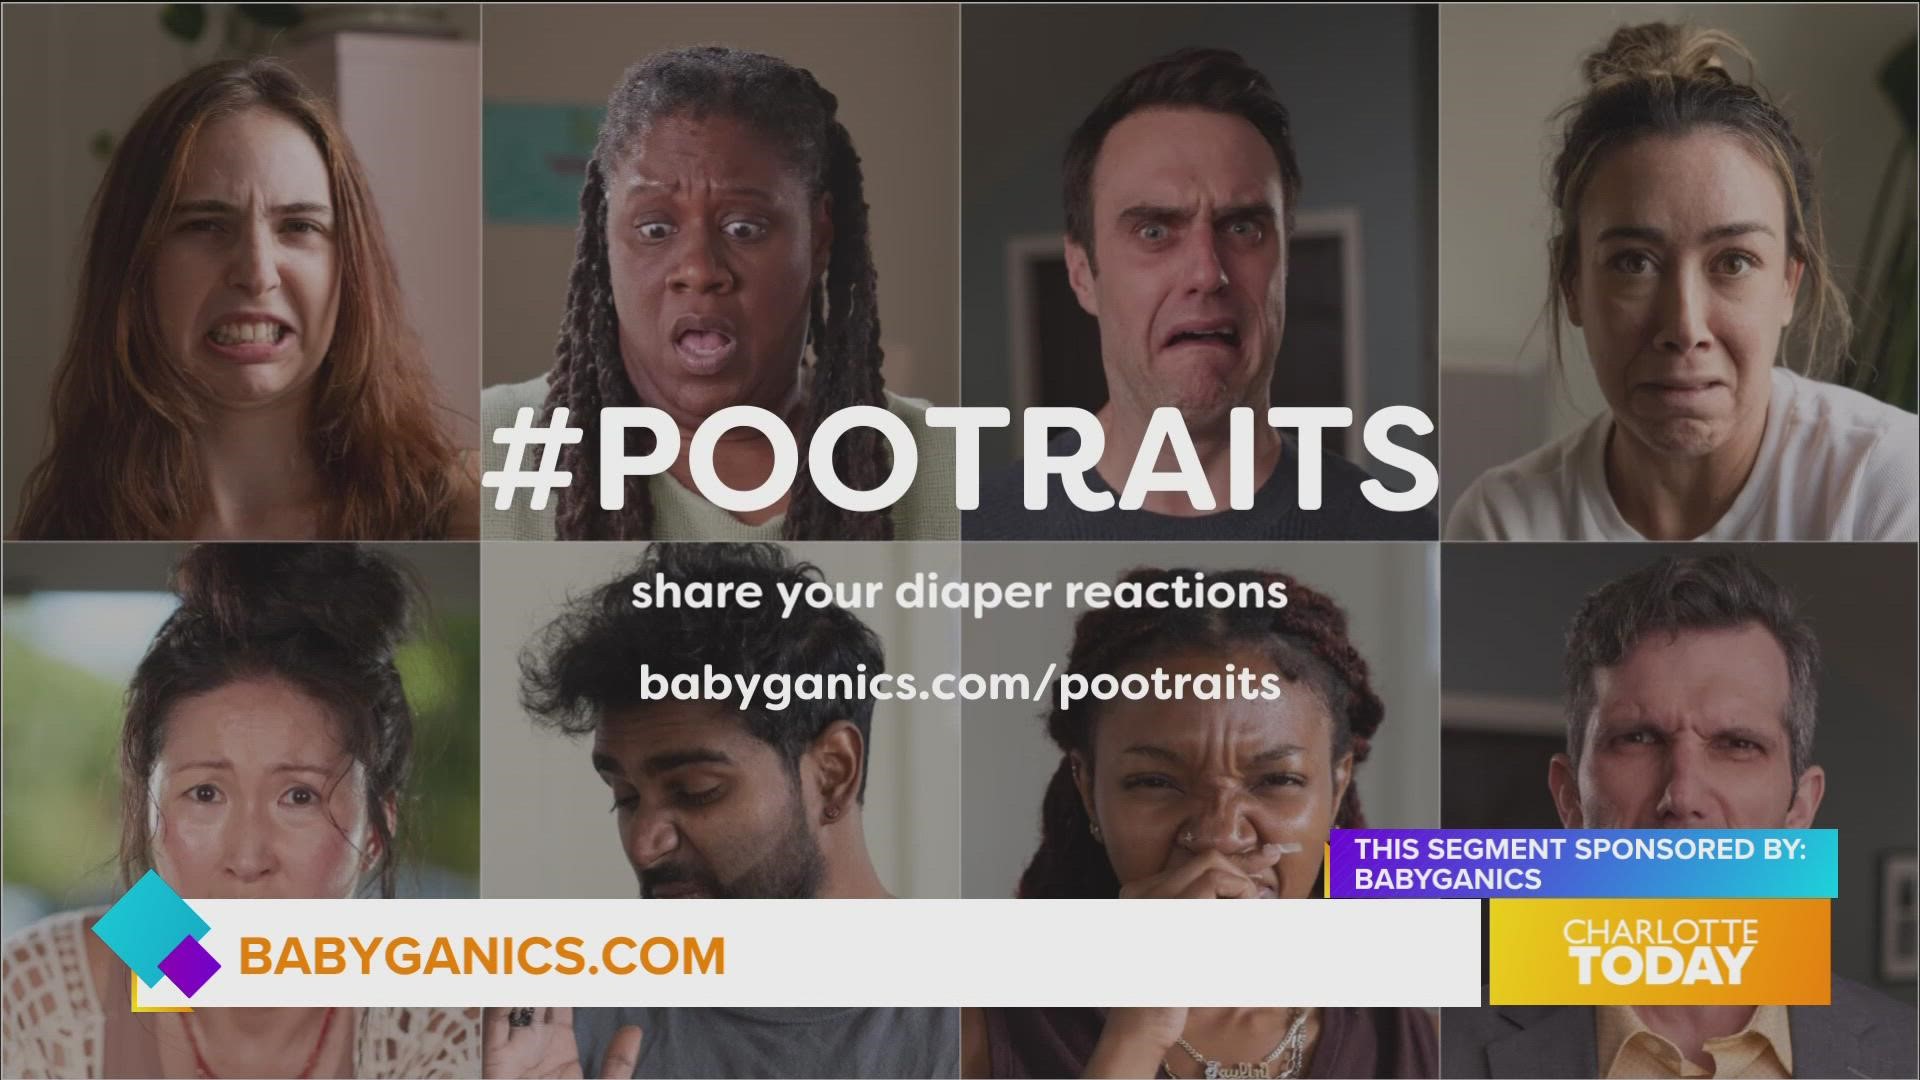 #Pootraits Movement Calls for Diaper Reaction Pics to Challenge